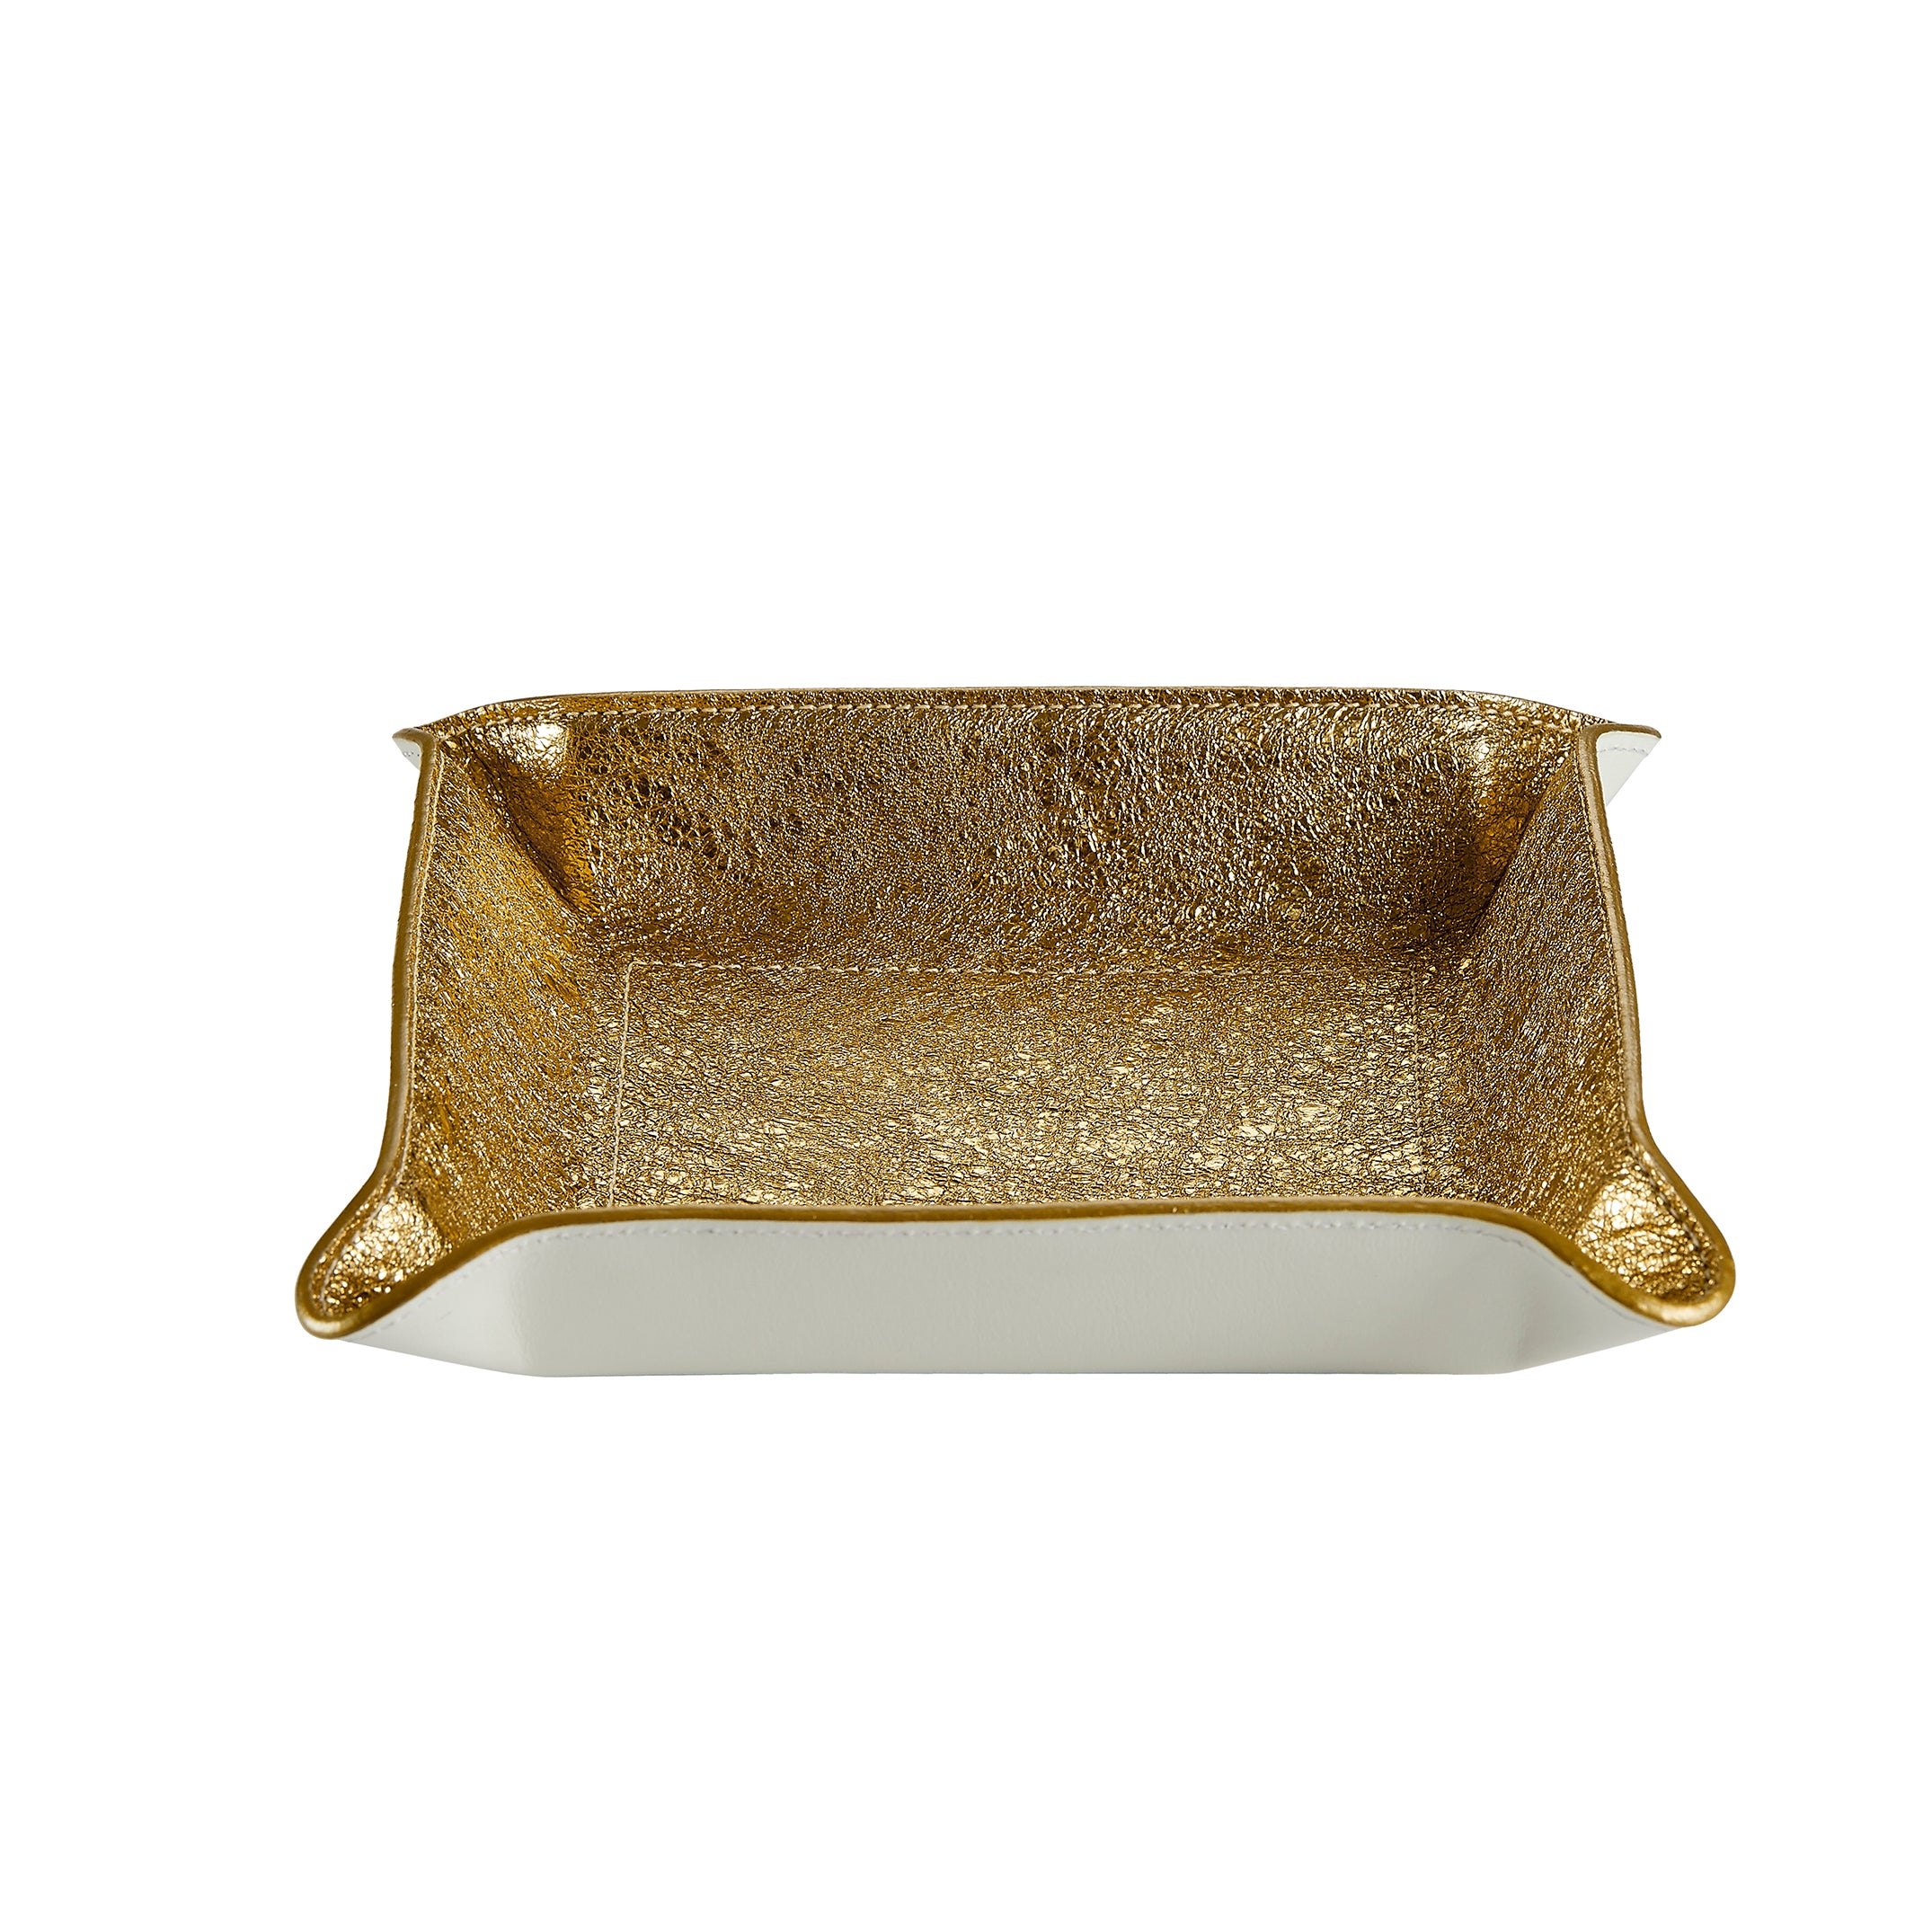 Graphic Image Medium Leather Catchall Tray Gold Crackle Metallic Leather